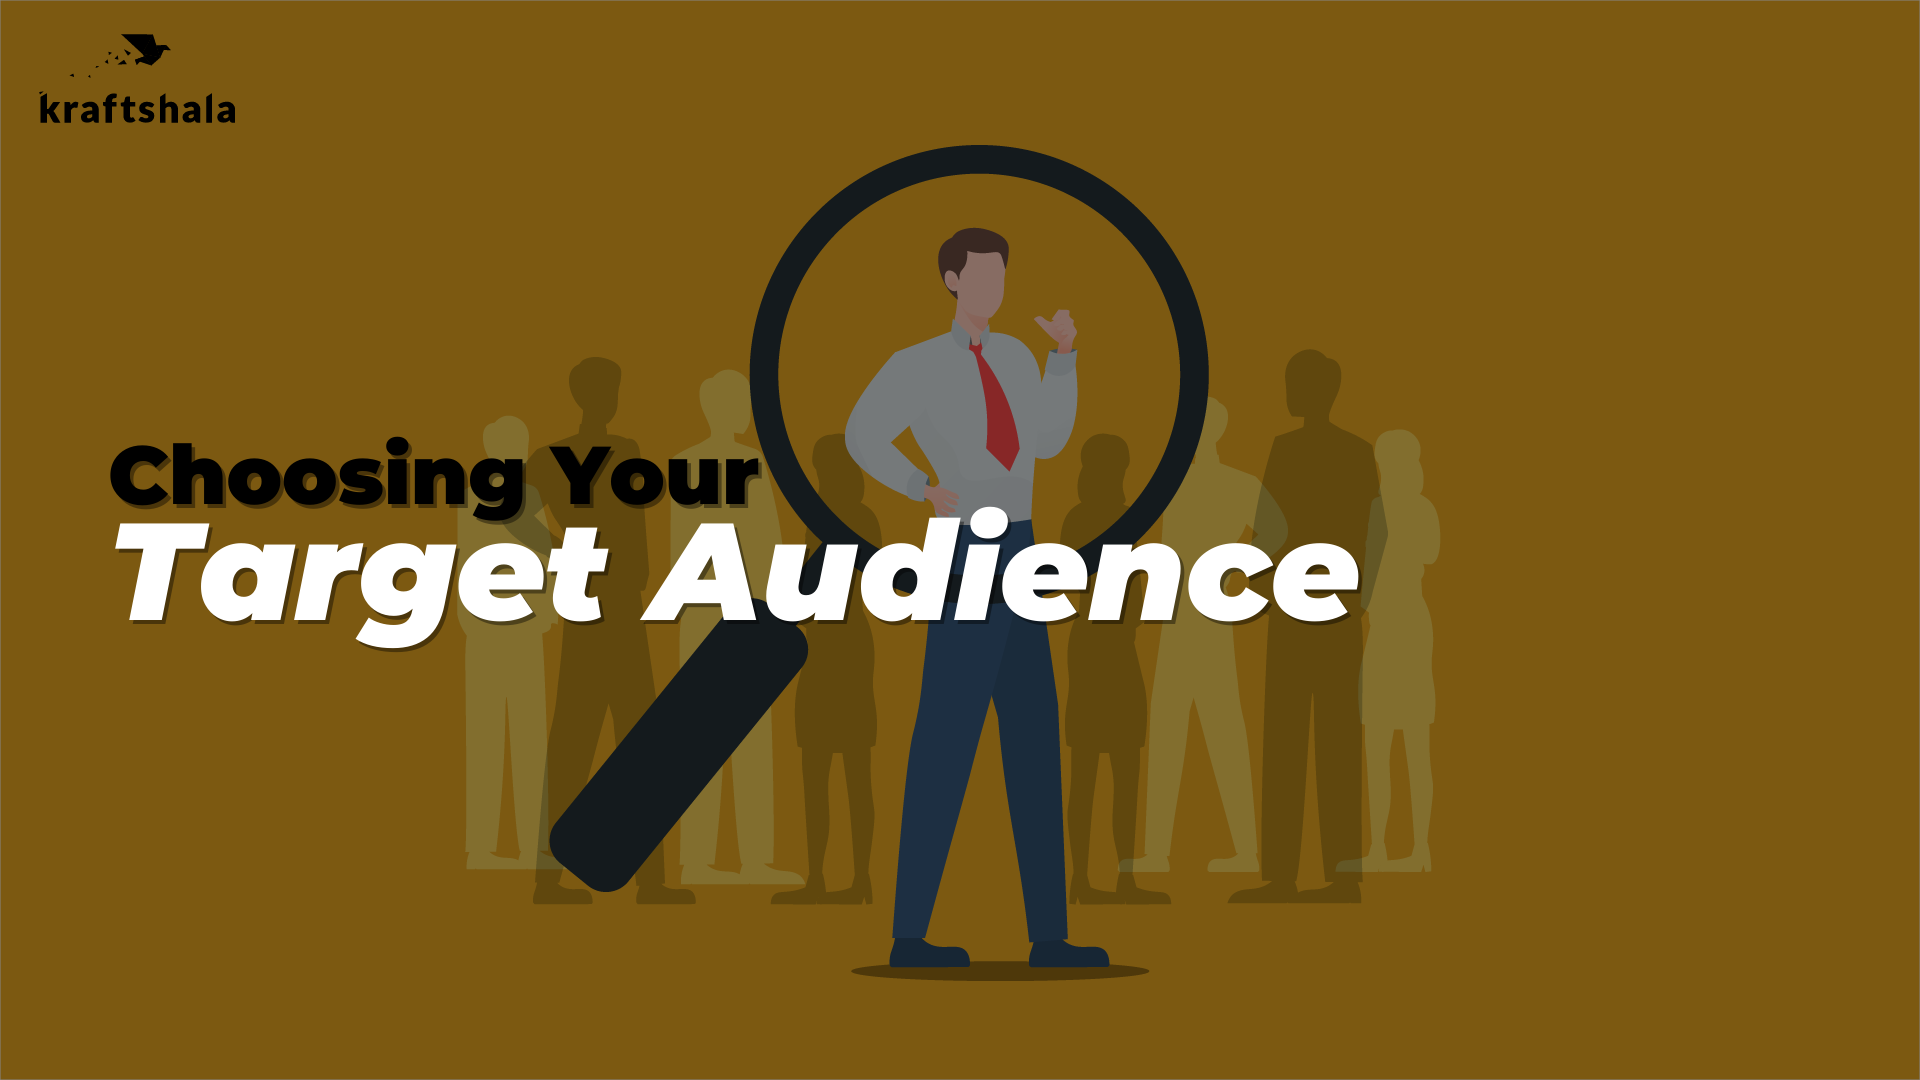 Why is Defining a Target Audience Critical for a Brand?